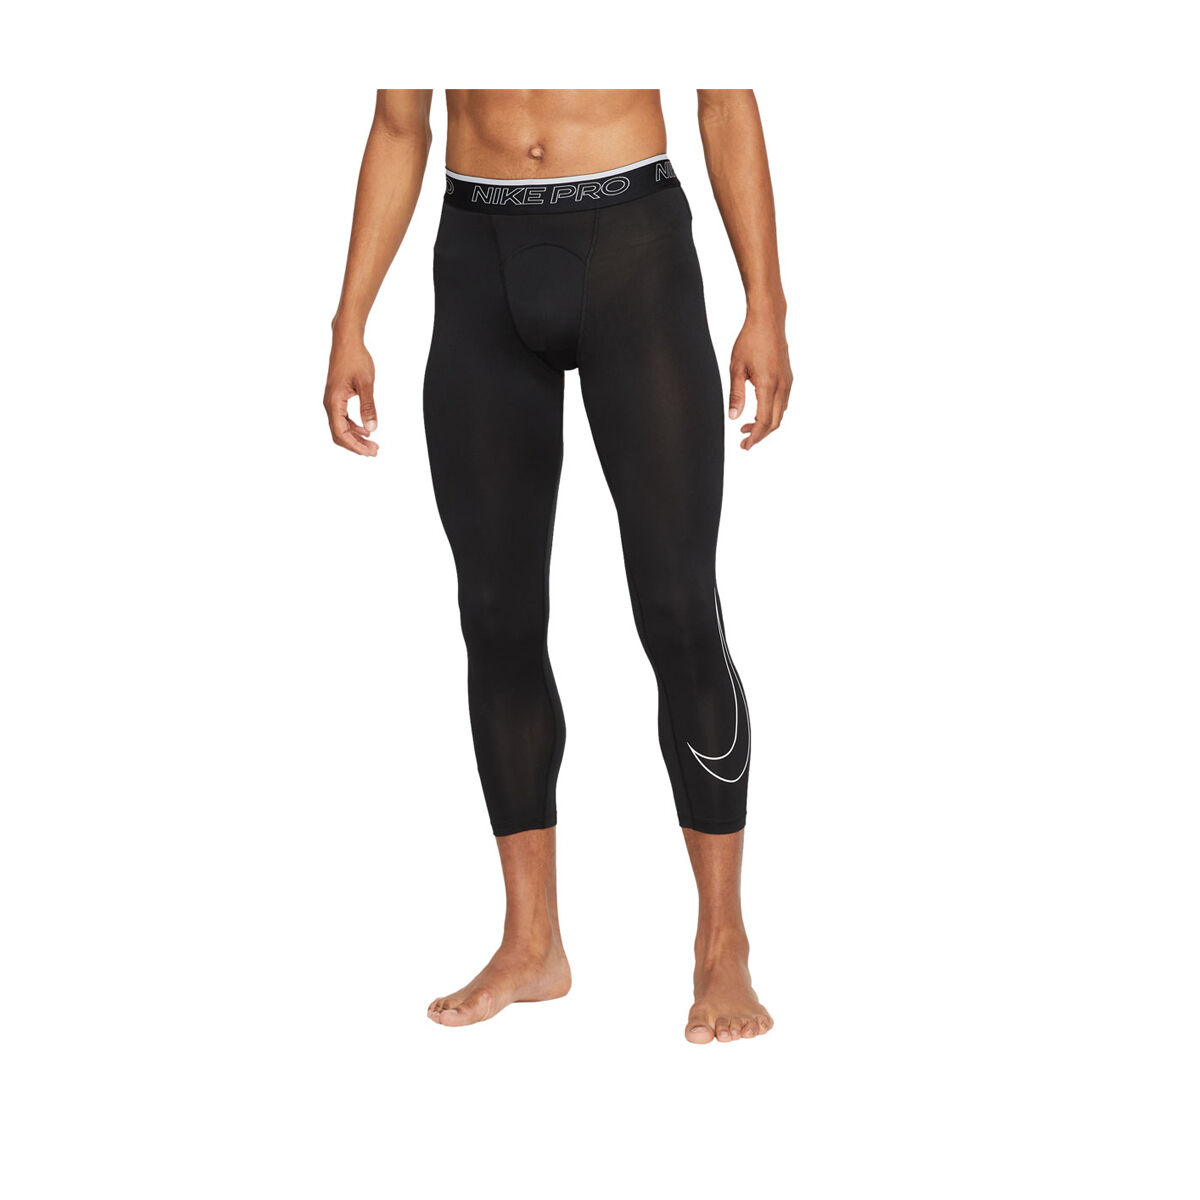 McDavid Compression Pants Tights. ¾-Length with Germany